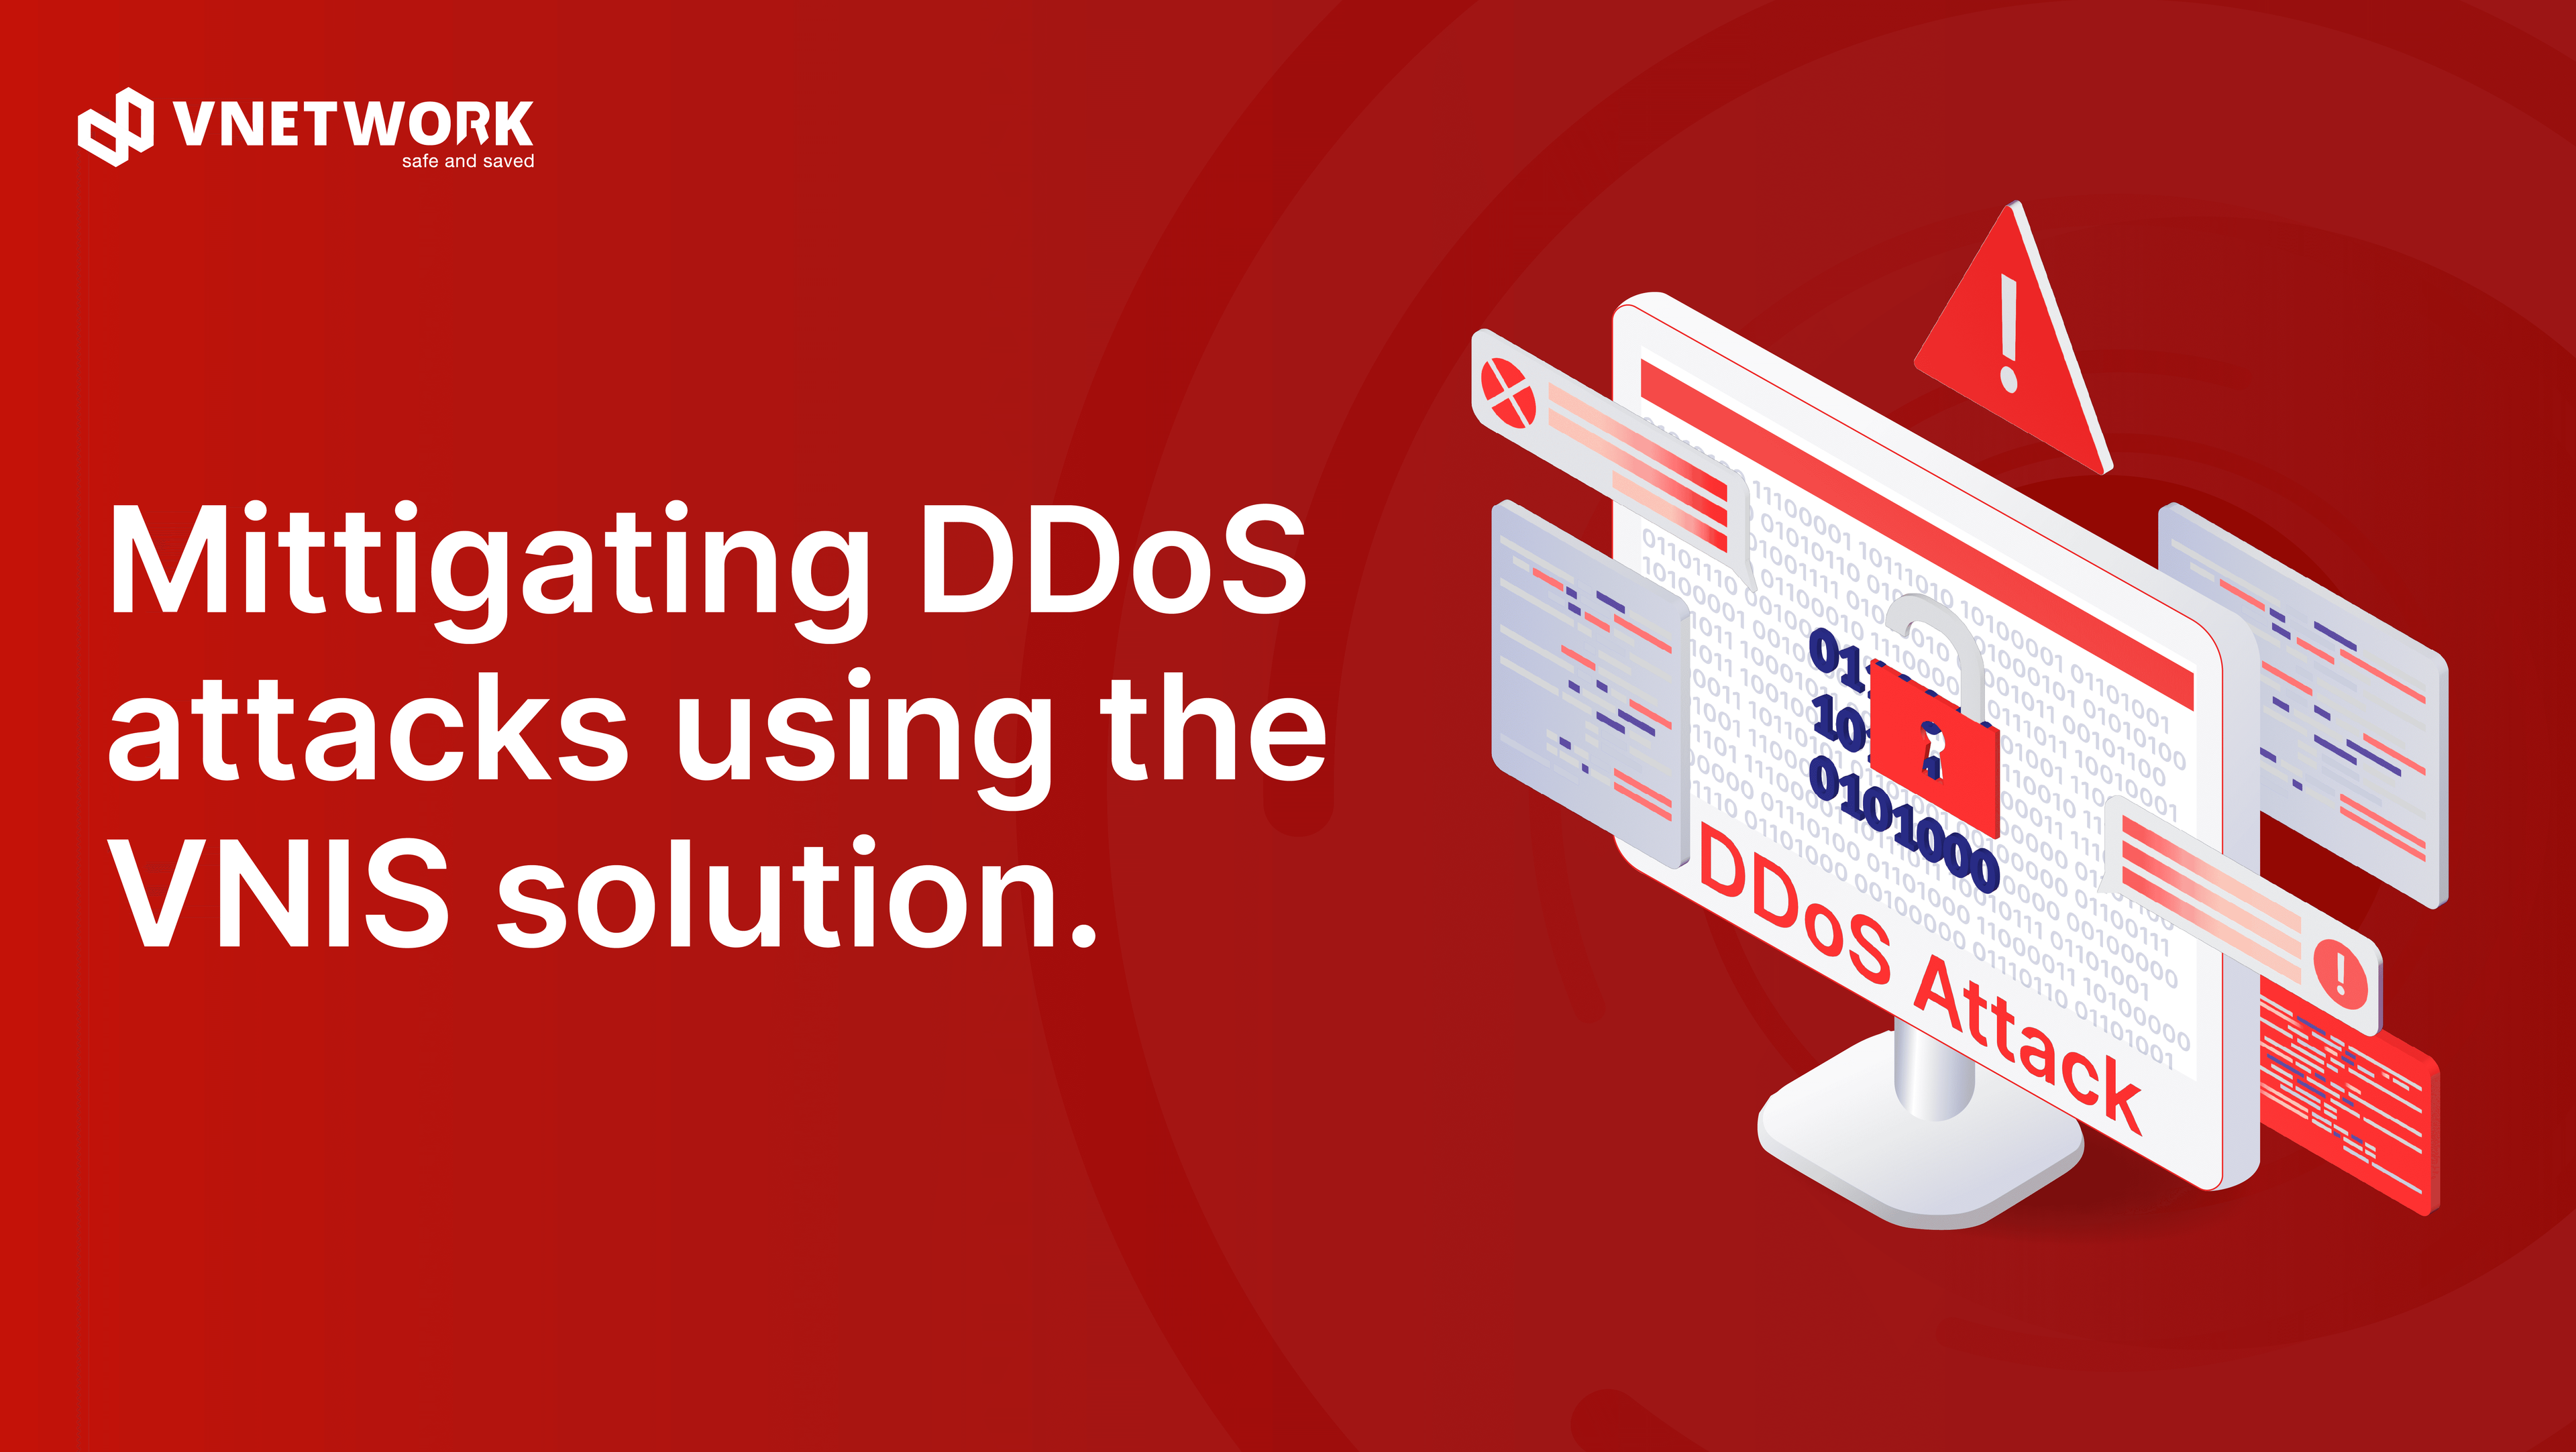 How to prevent DDoS? Which solution is the most optimal?